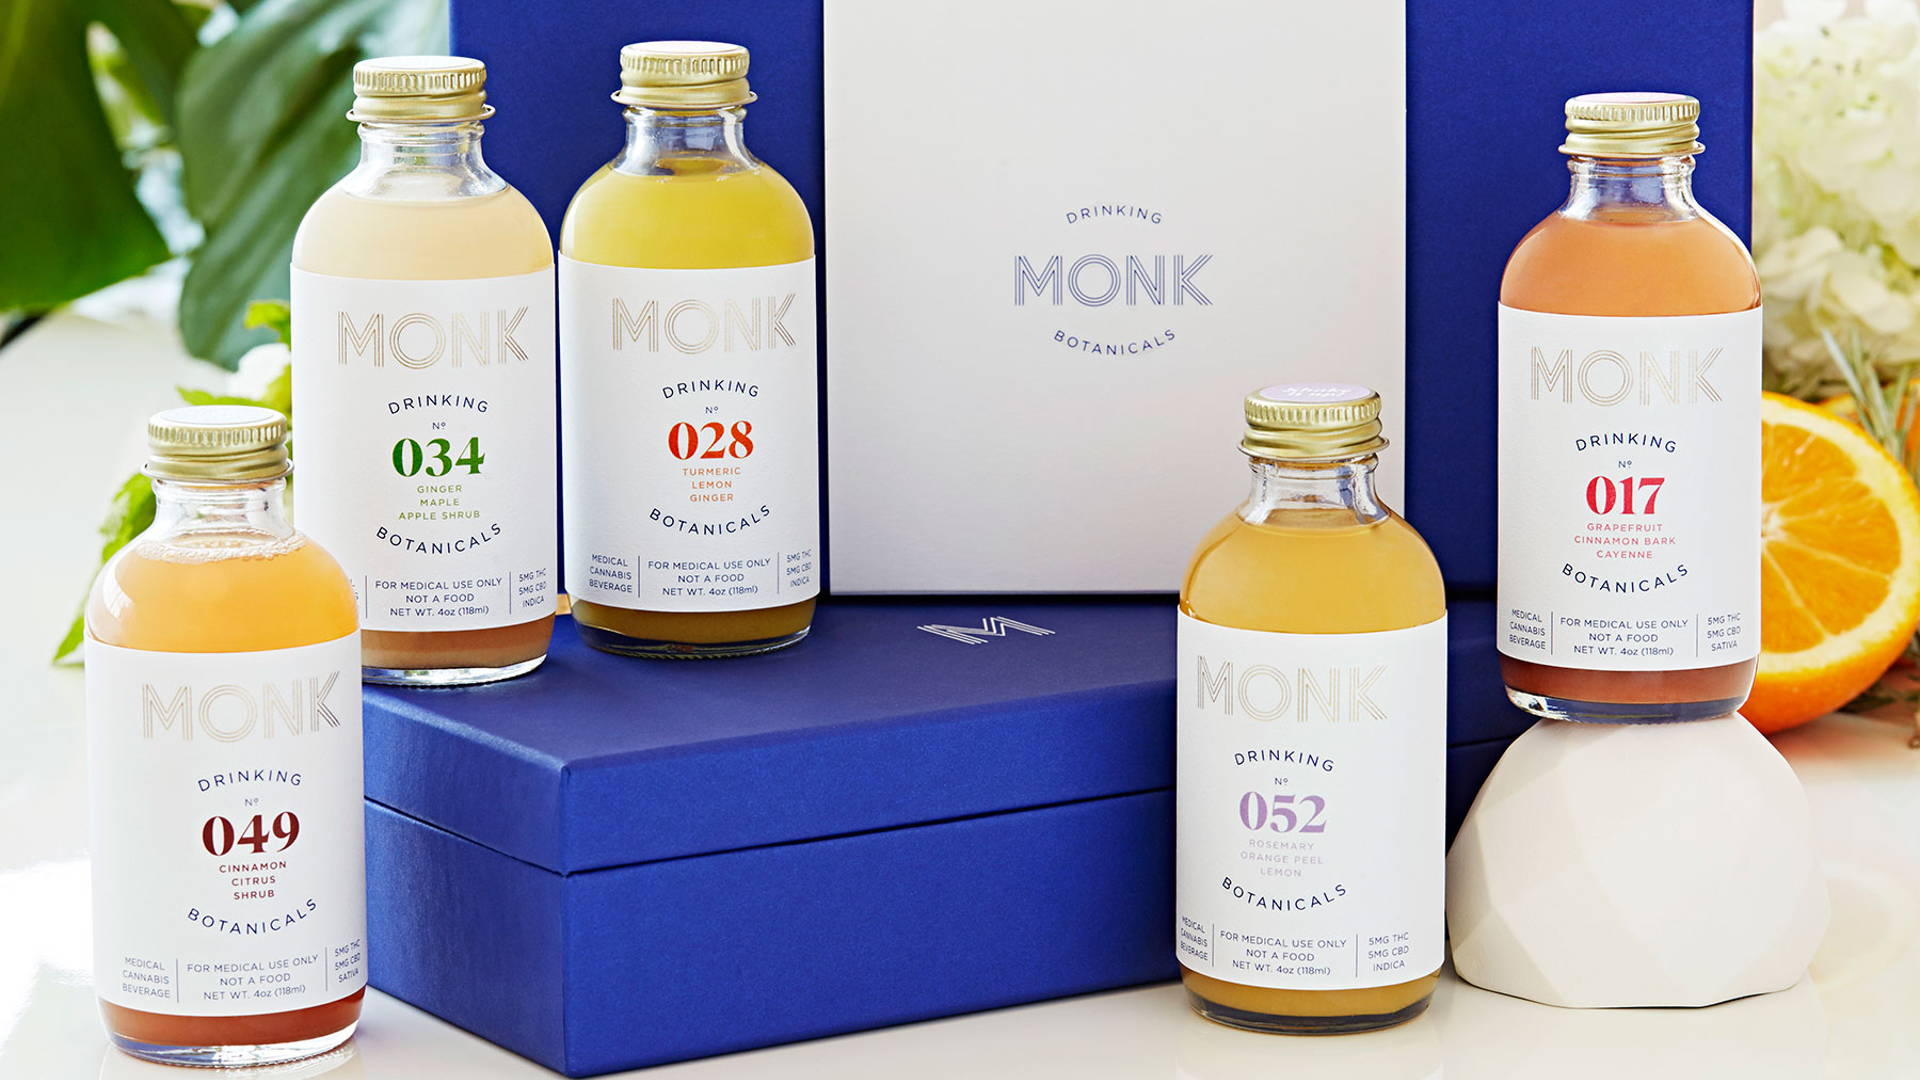 Featured image for How Monk Provisions Brought Their Drinking Botanicals to Life (Part 1)